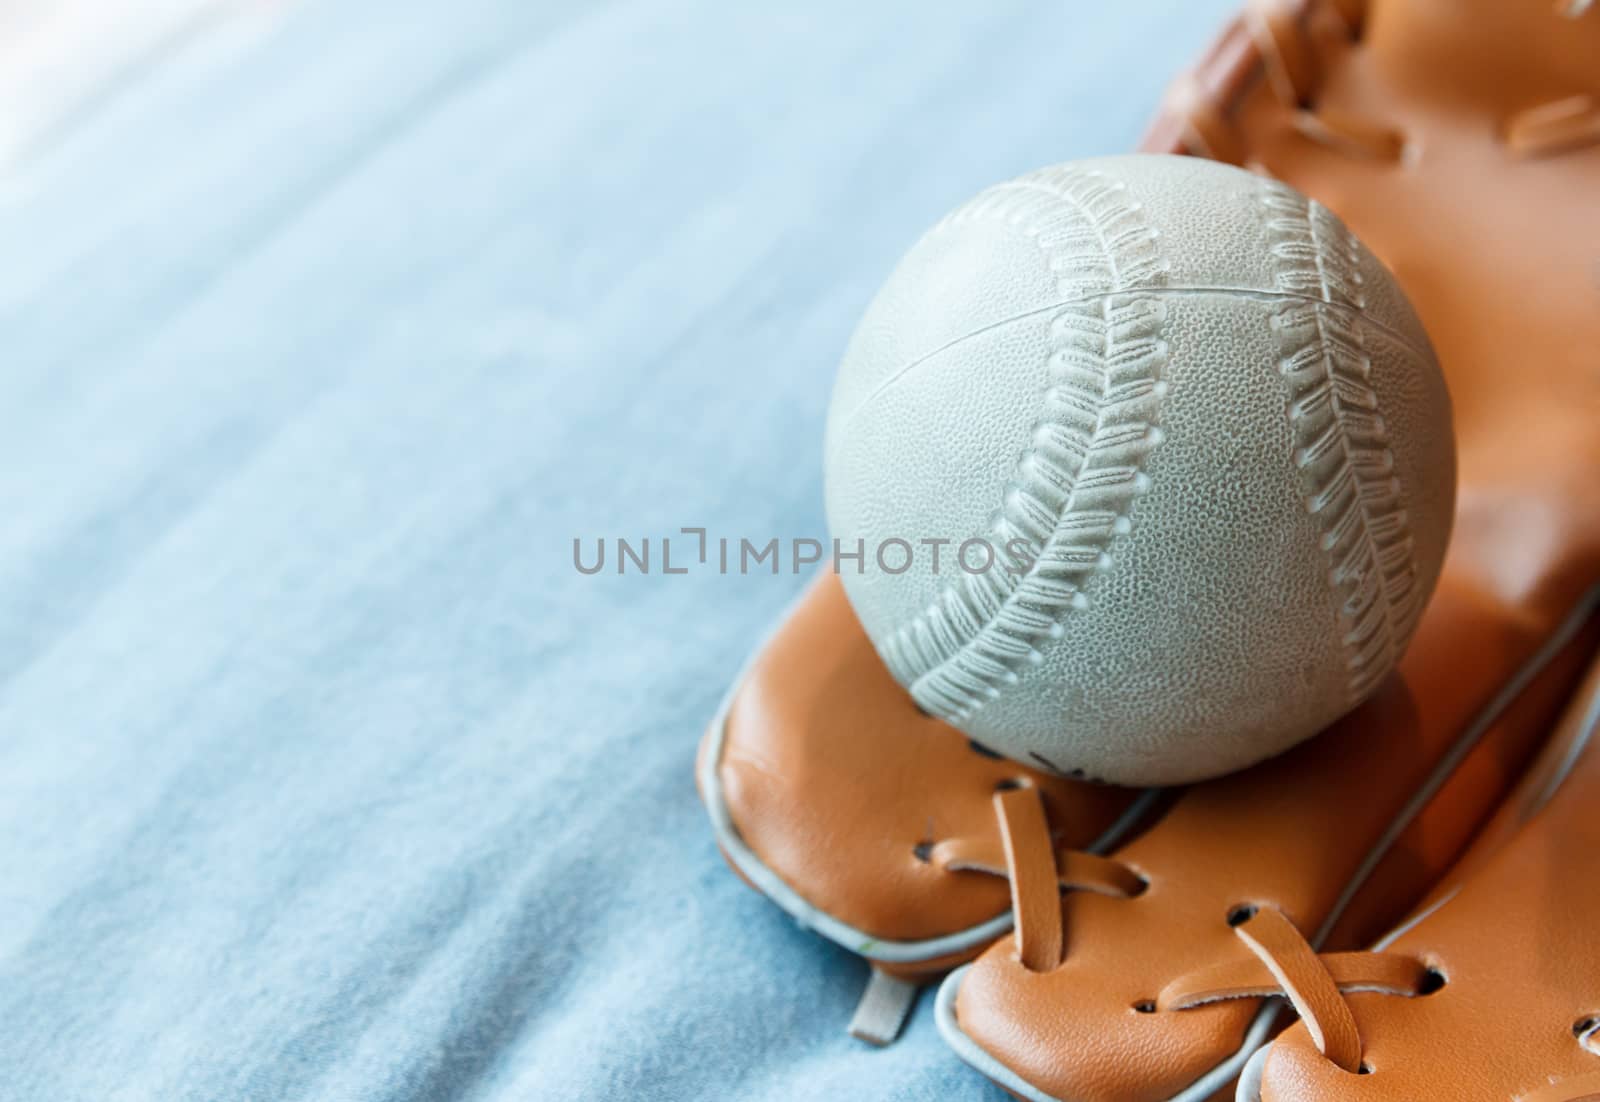 baseball in a glove on blue bed by vitawin